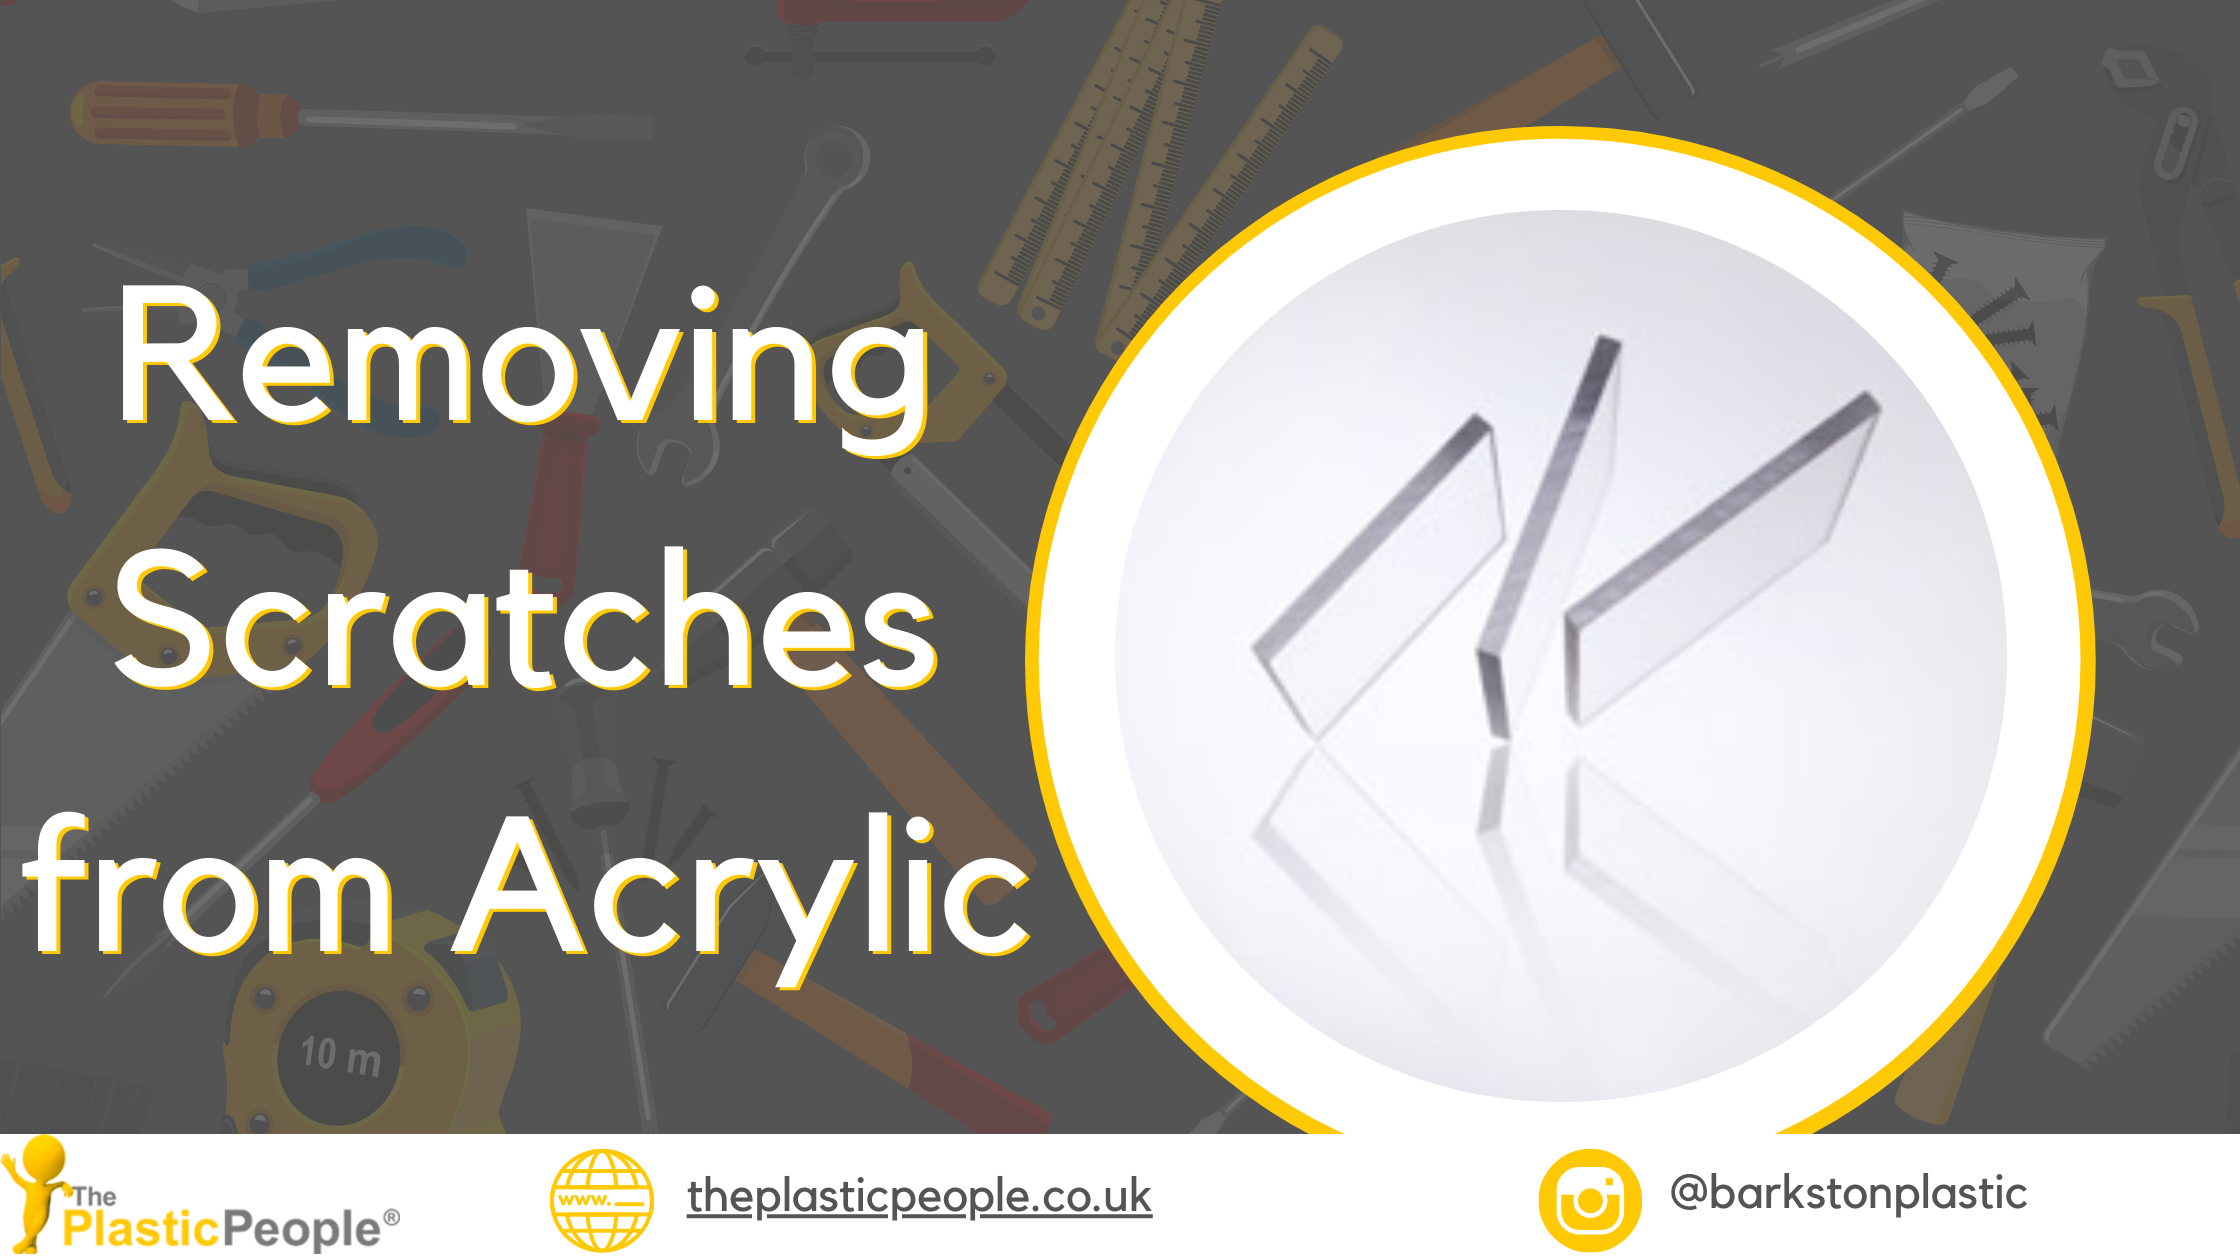 https://www.theplasticpeople.co.uk/getattachment/Advice/Blog/February-2018/How-To-Remove-Scratches-From-Acrylic/remove-scratches-blog.png?lang=en-GB